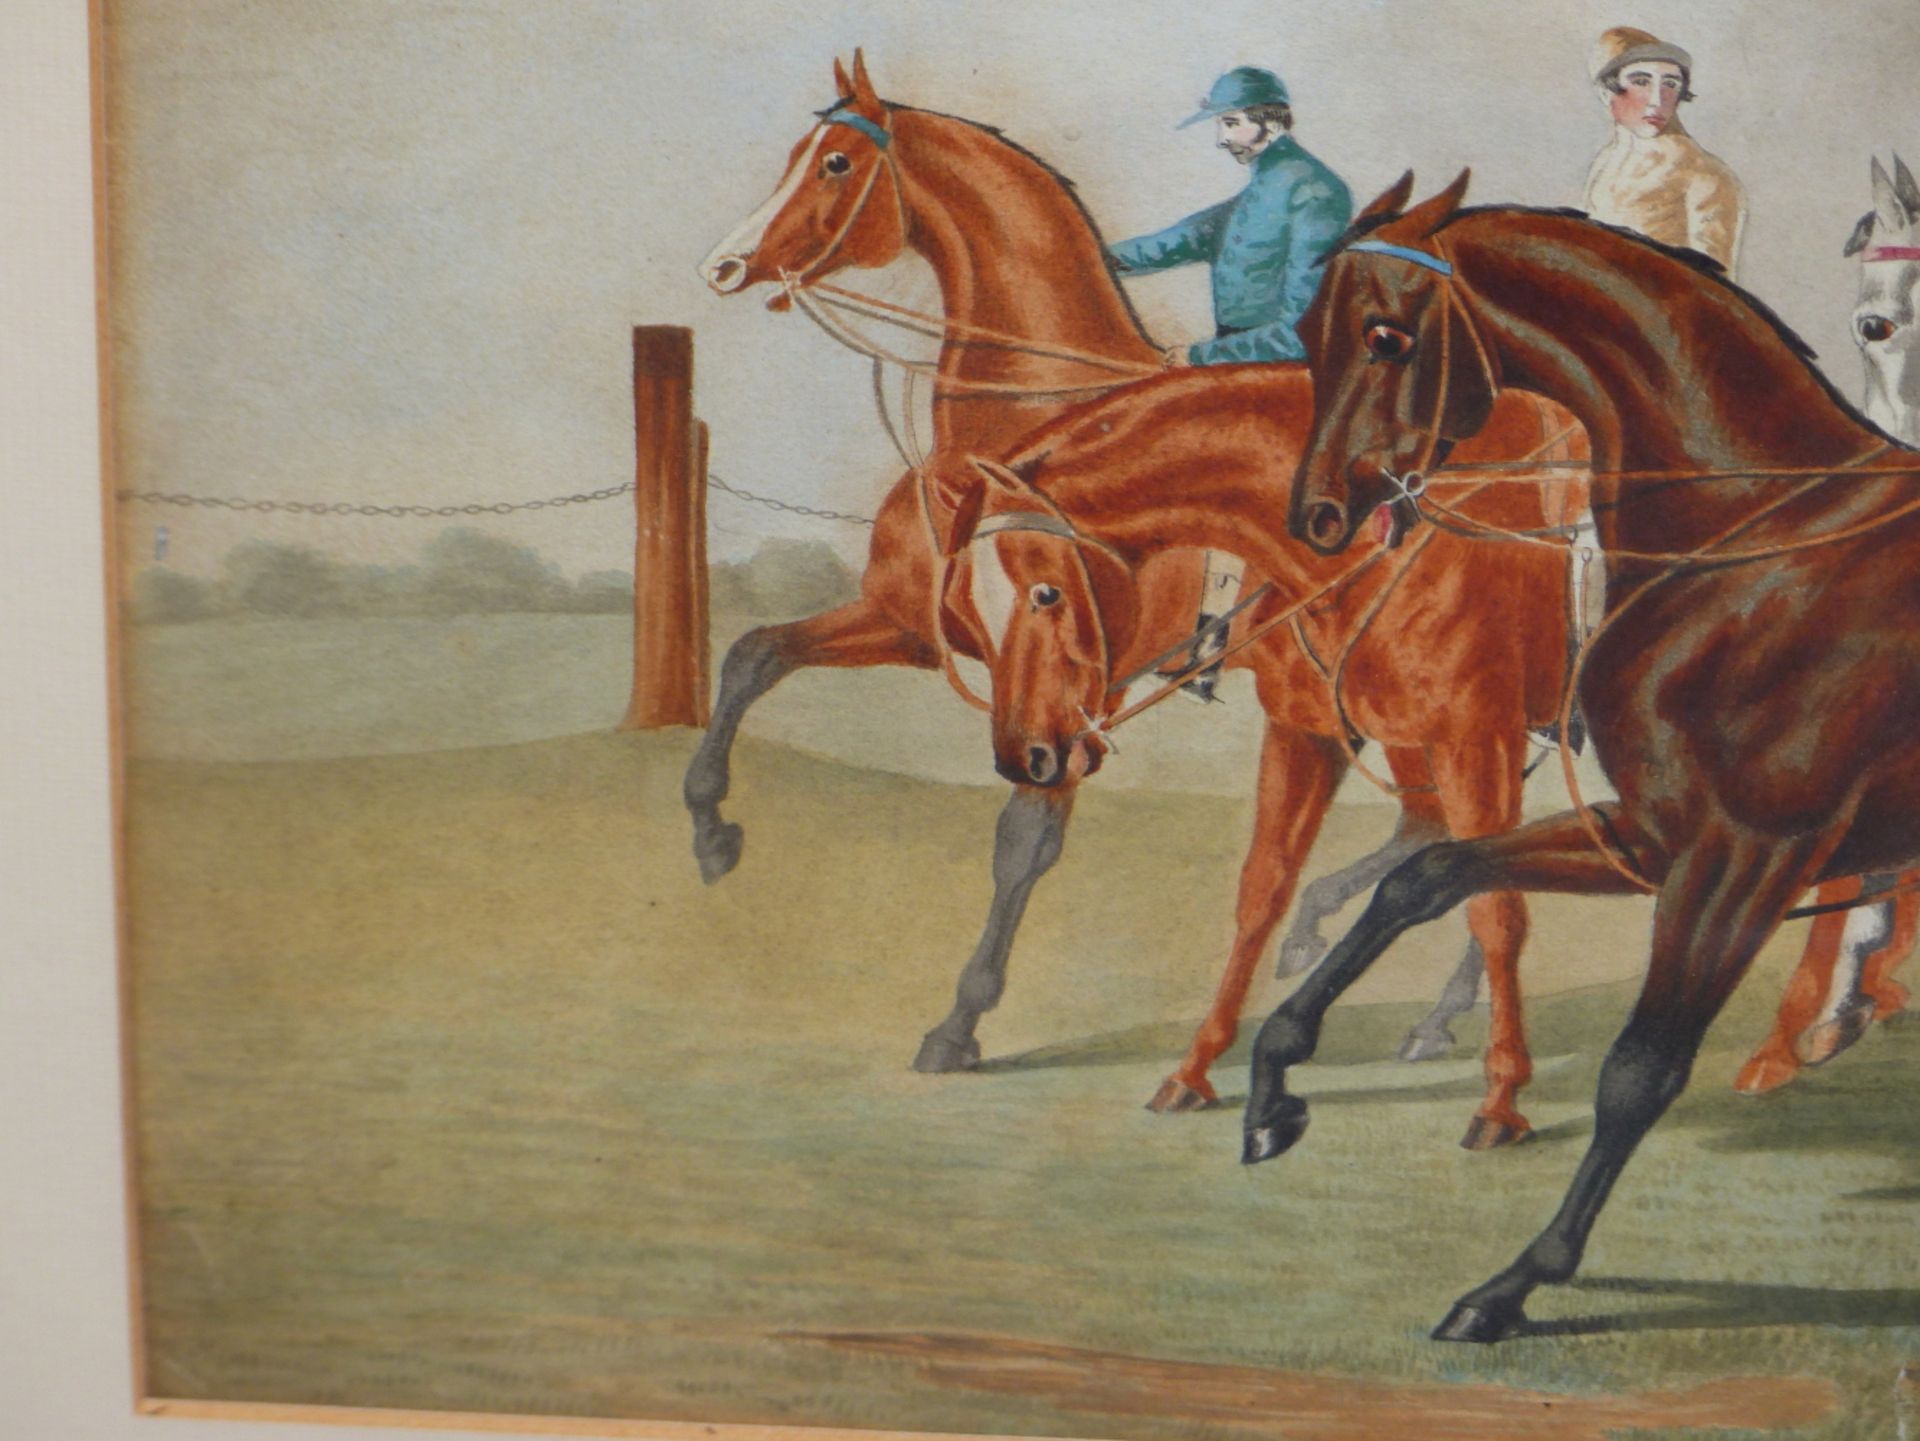 19th C. ENGLISH SCHOOL DANIEL O'ROUKE WINNING HE DERBY 1852, REPUTEDLY BY JAMES G. NOBLE, - Image 20 of 26